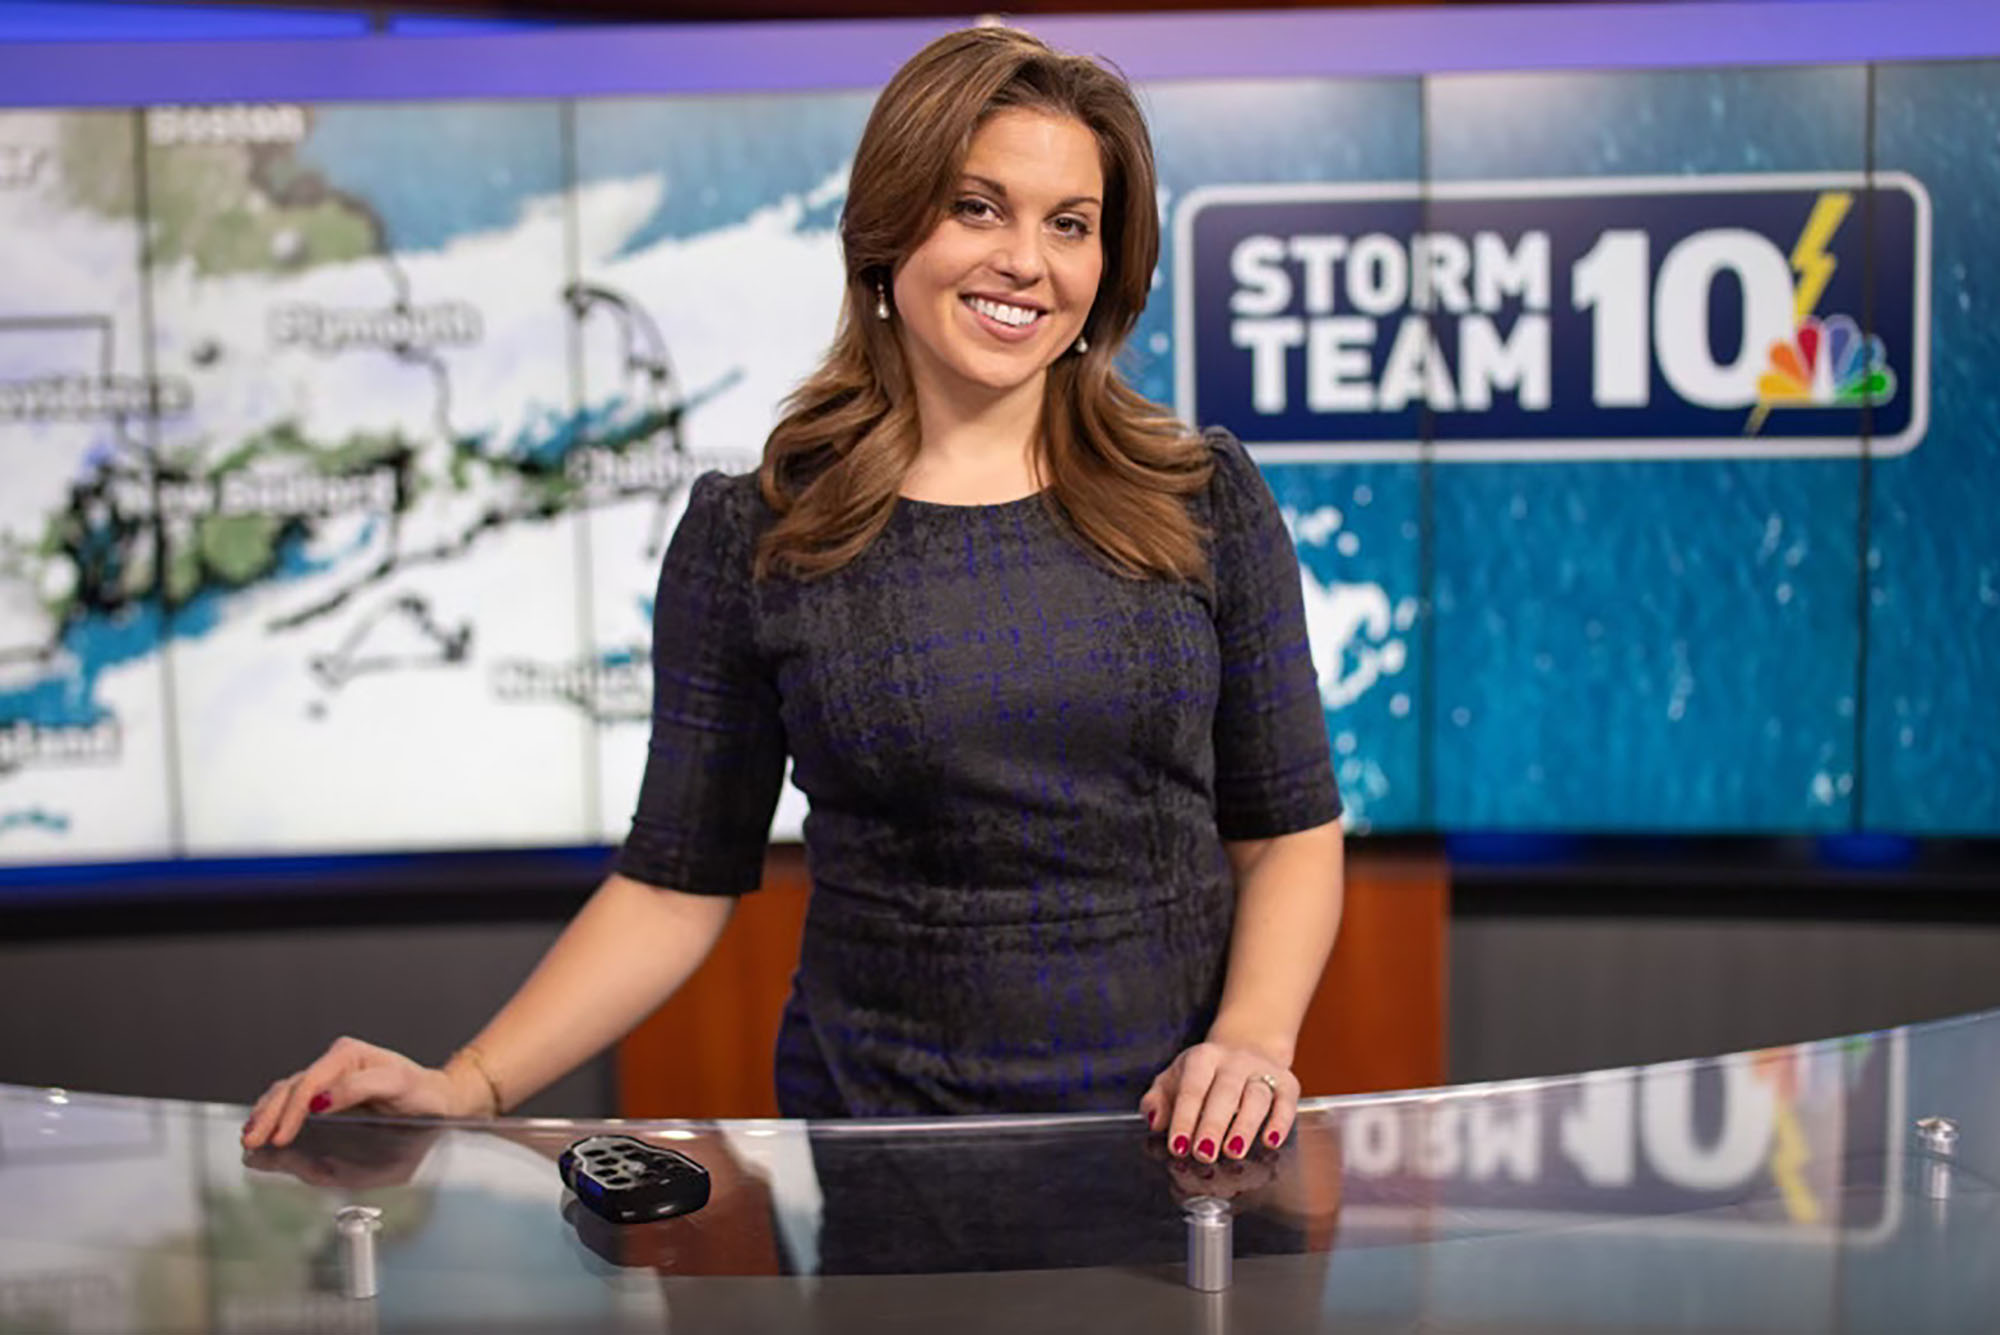 Photo: Christina Erne, a young woman with medium length brown hair and a dark dress sits at a news desk with the logo of the news station behind her left shoulder.